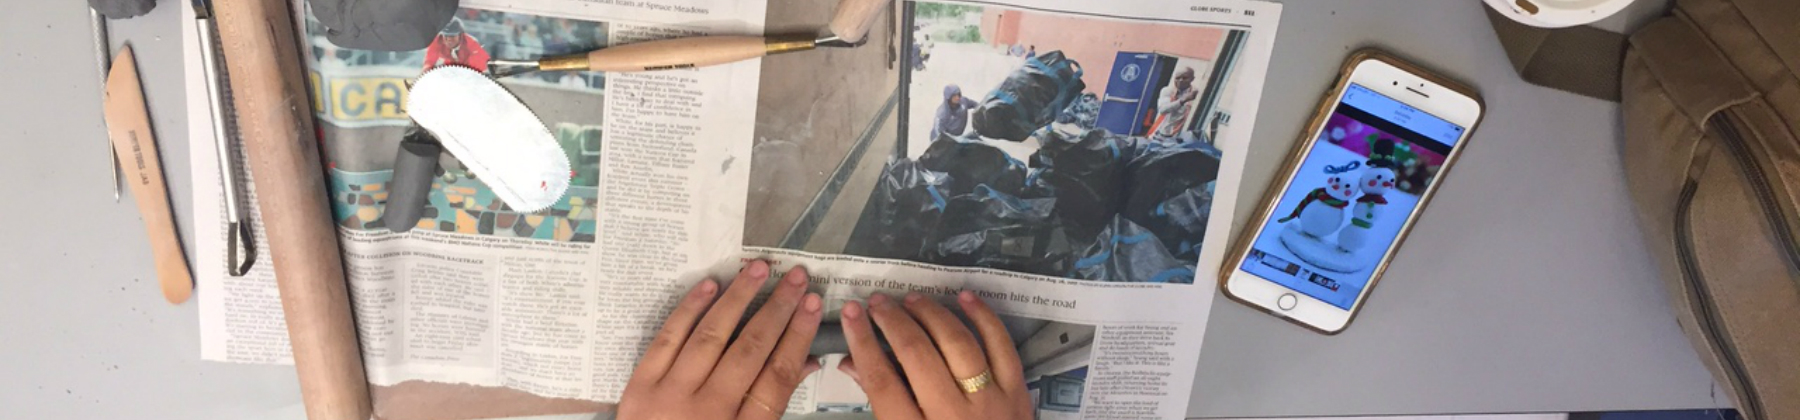 Two hands roll out clay on a newspaper. Clay sculpting tools are on the left of the table, while a cellphone is on the right.